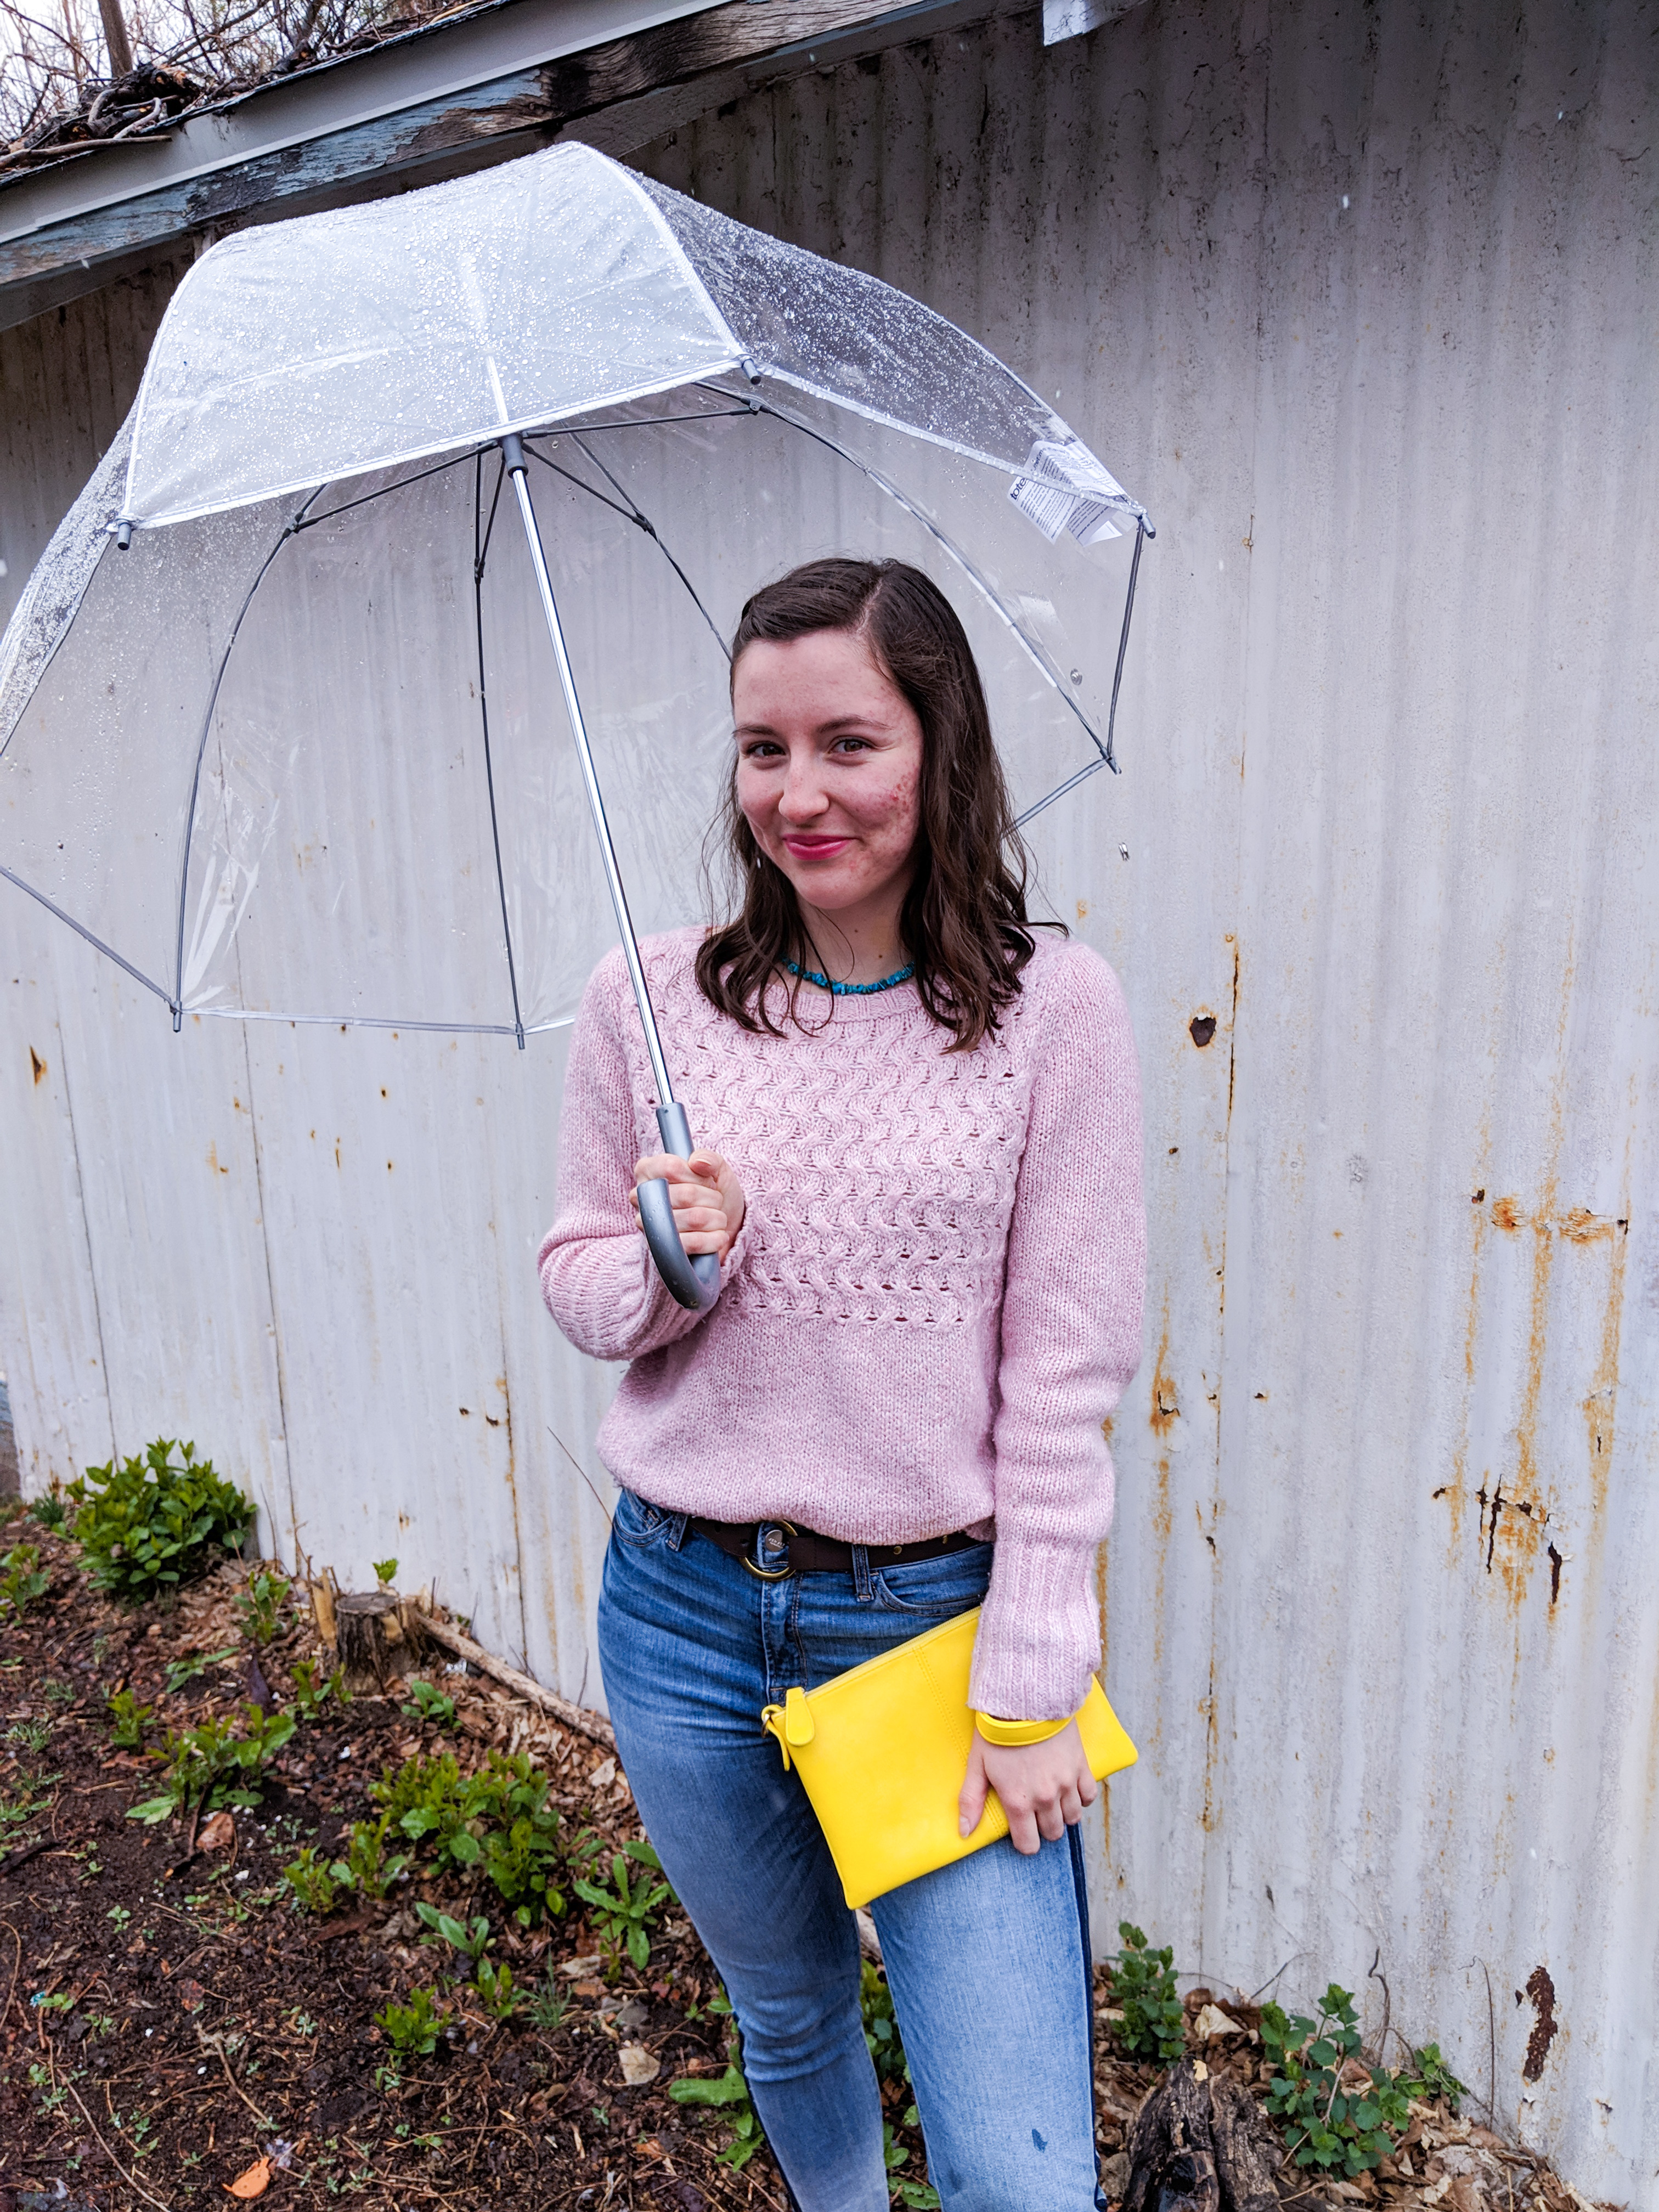 dancing in the rain, rainy day, clear umbrella, pops of color, yellow purse